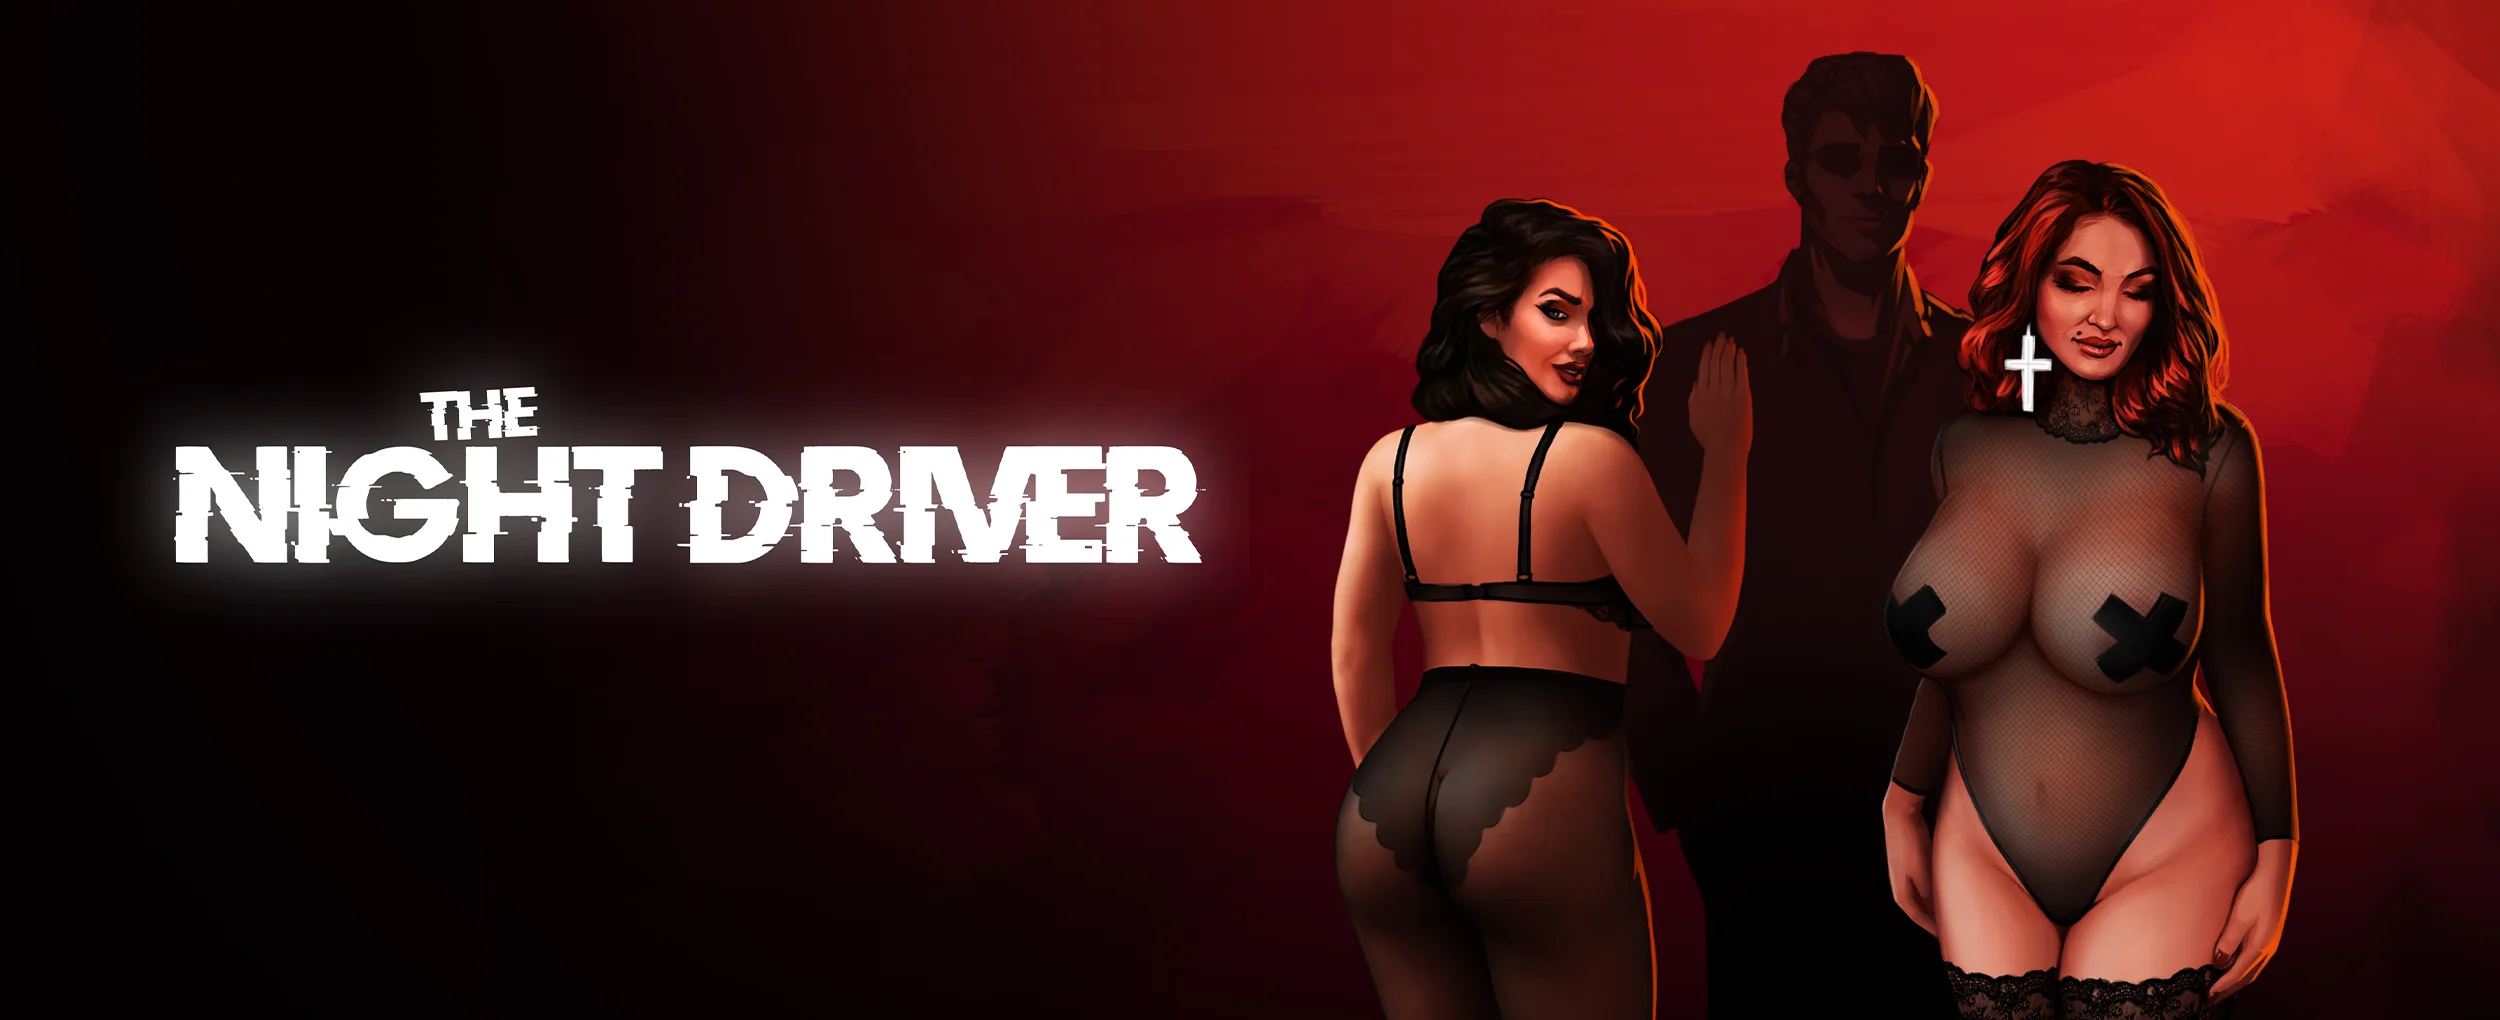 Download The Night Driver